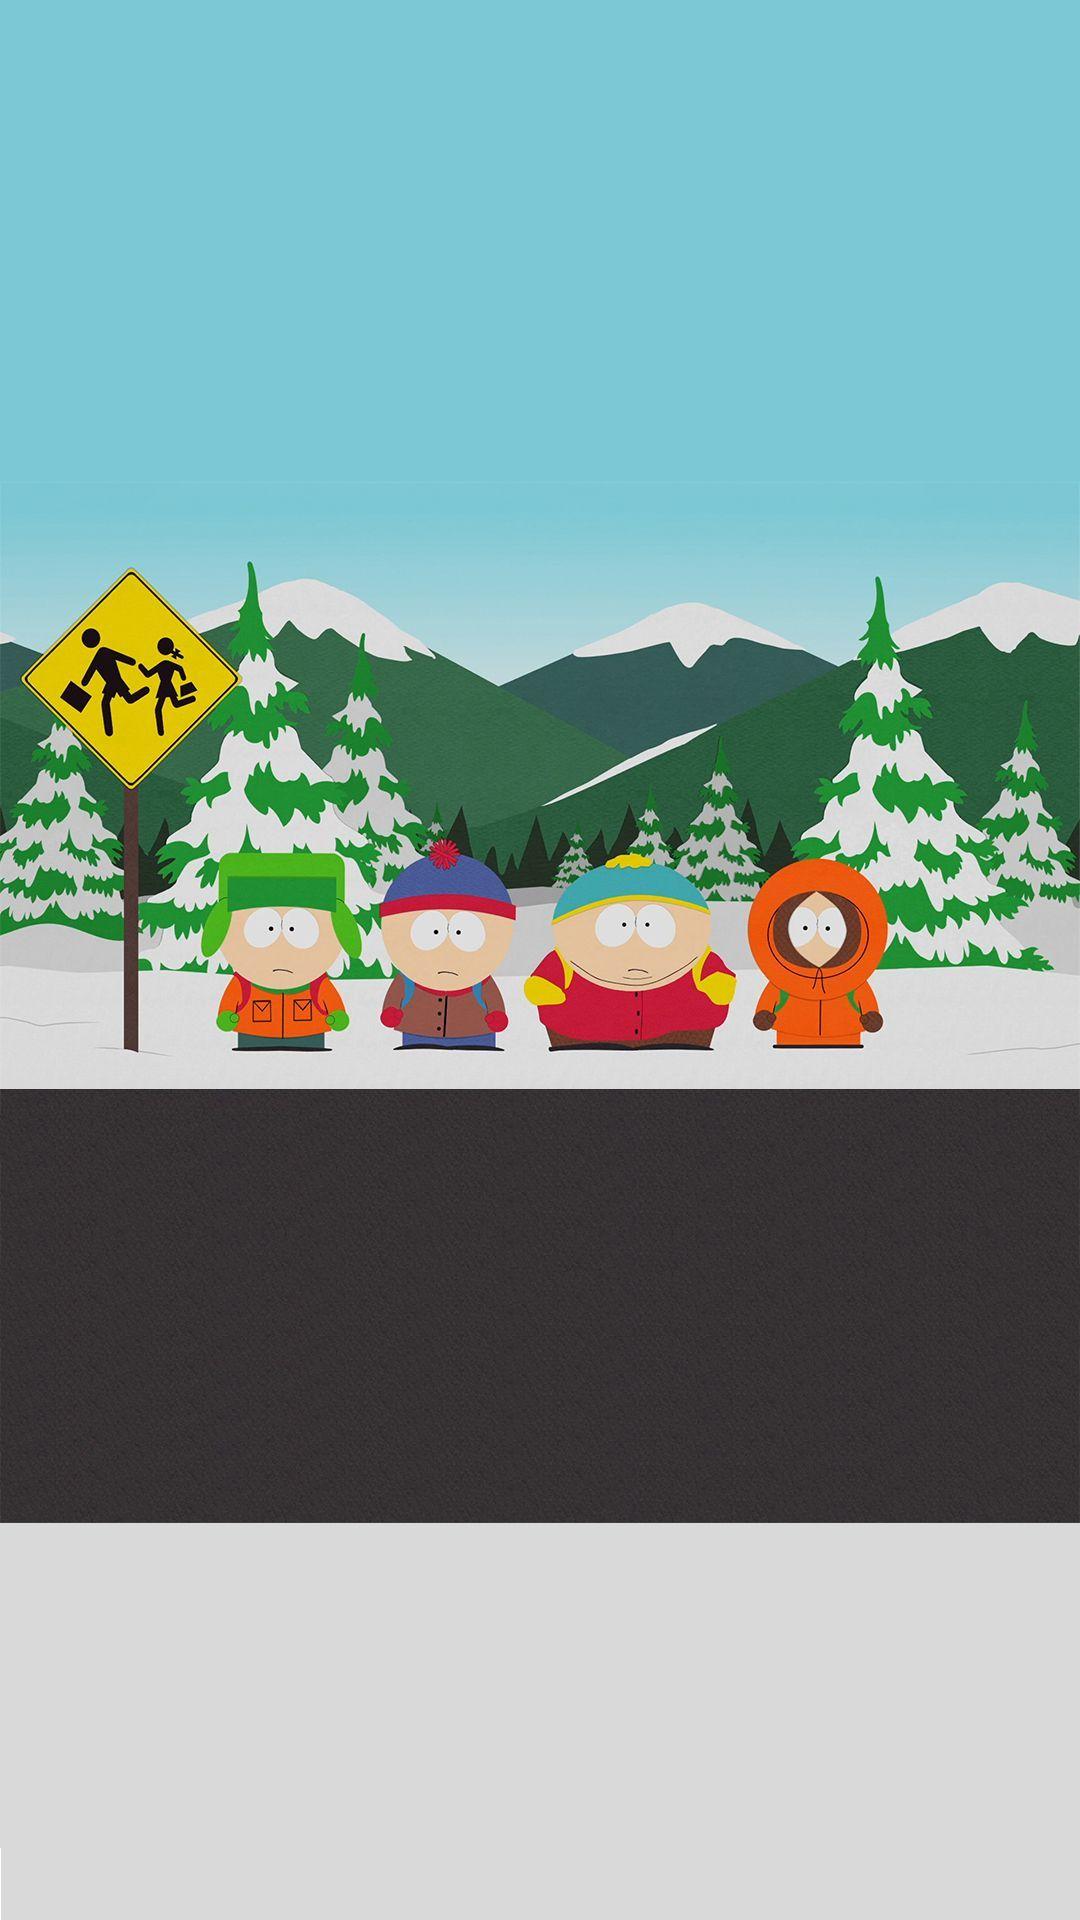 Wallpaper ID 366169  TV Show South Park Phone Wallpaper  1080x2340 free  download